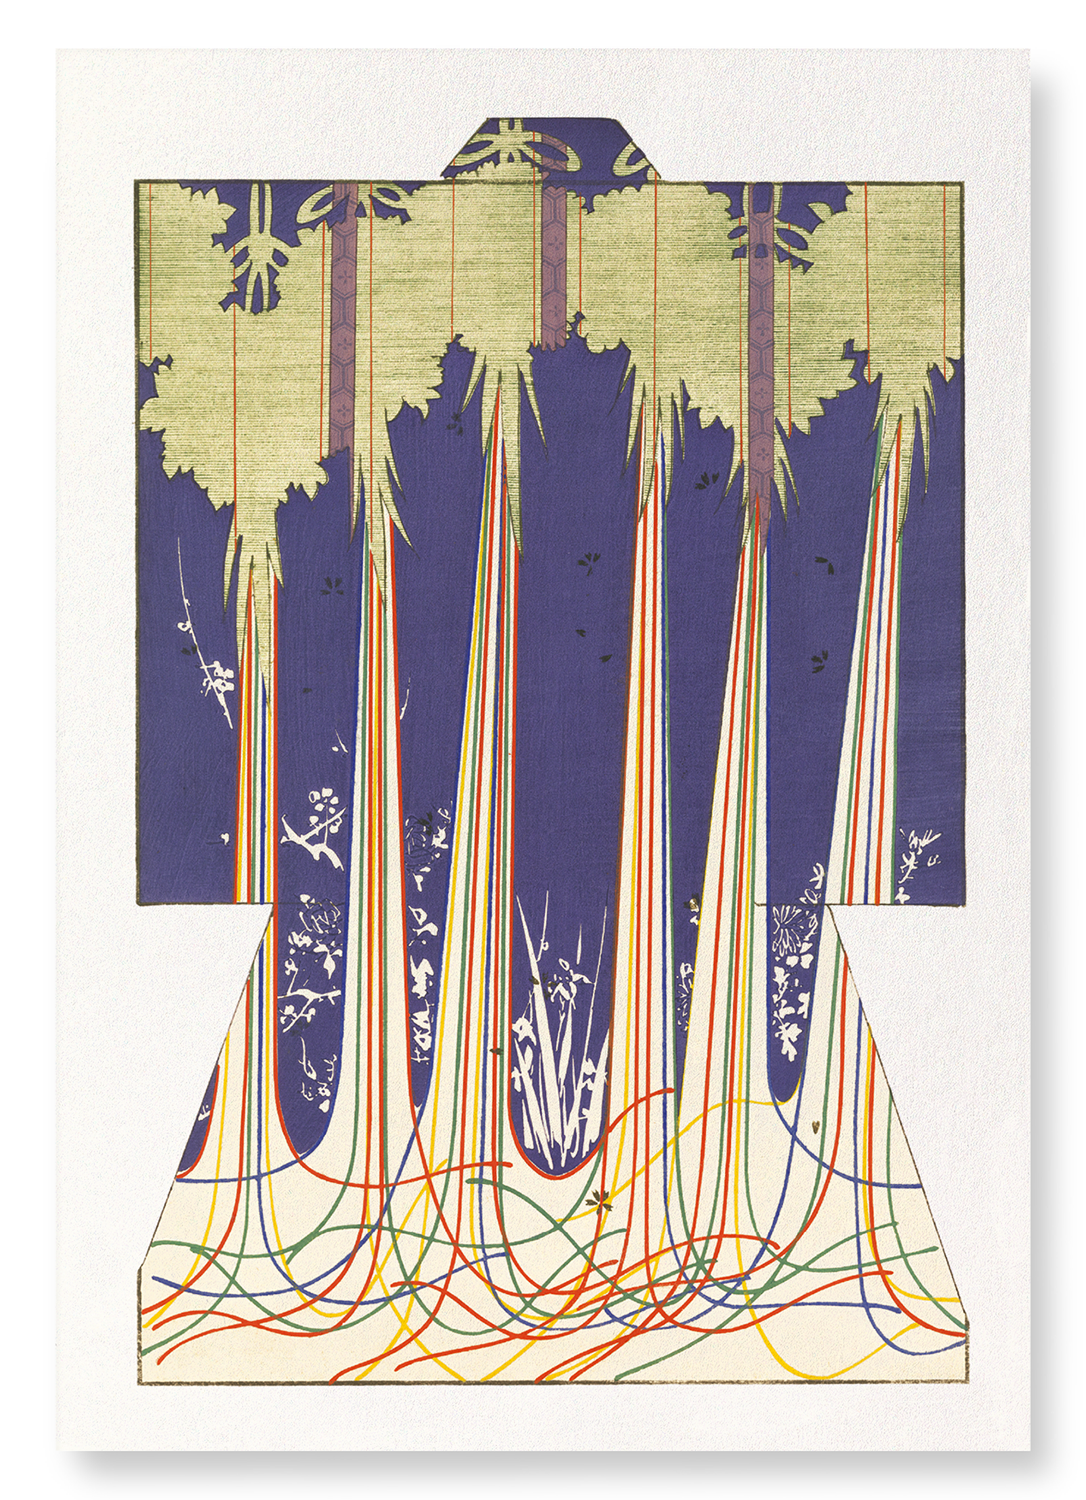 KIMONO OF FIVE COLOURED STRINGS OF BUDDHISM (1899)